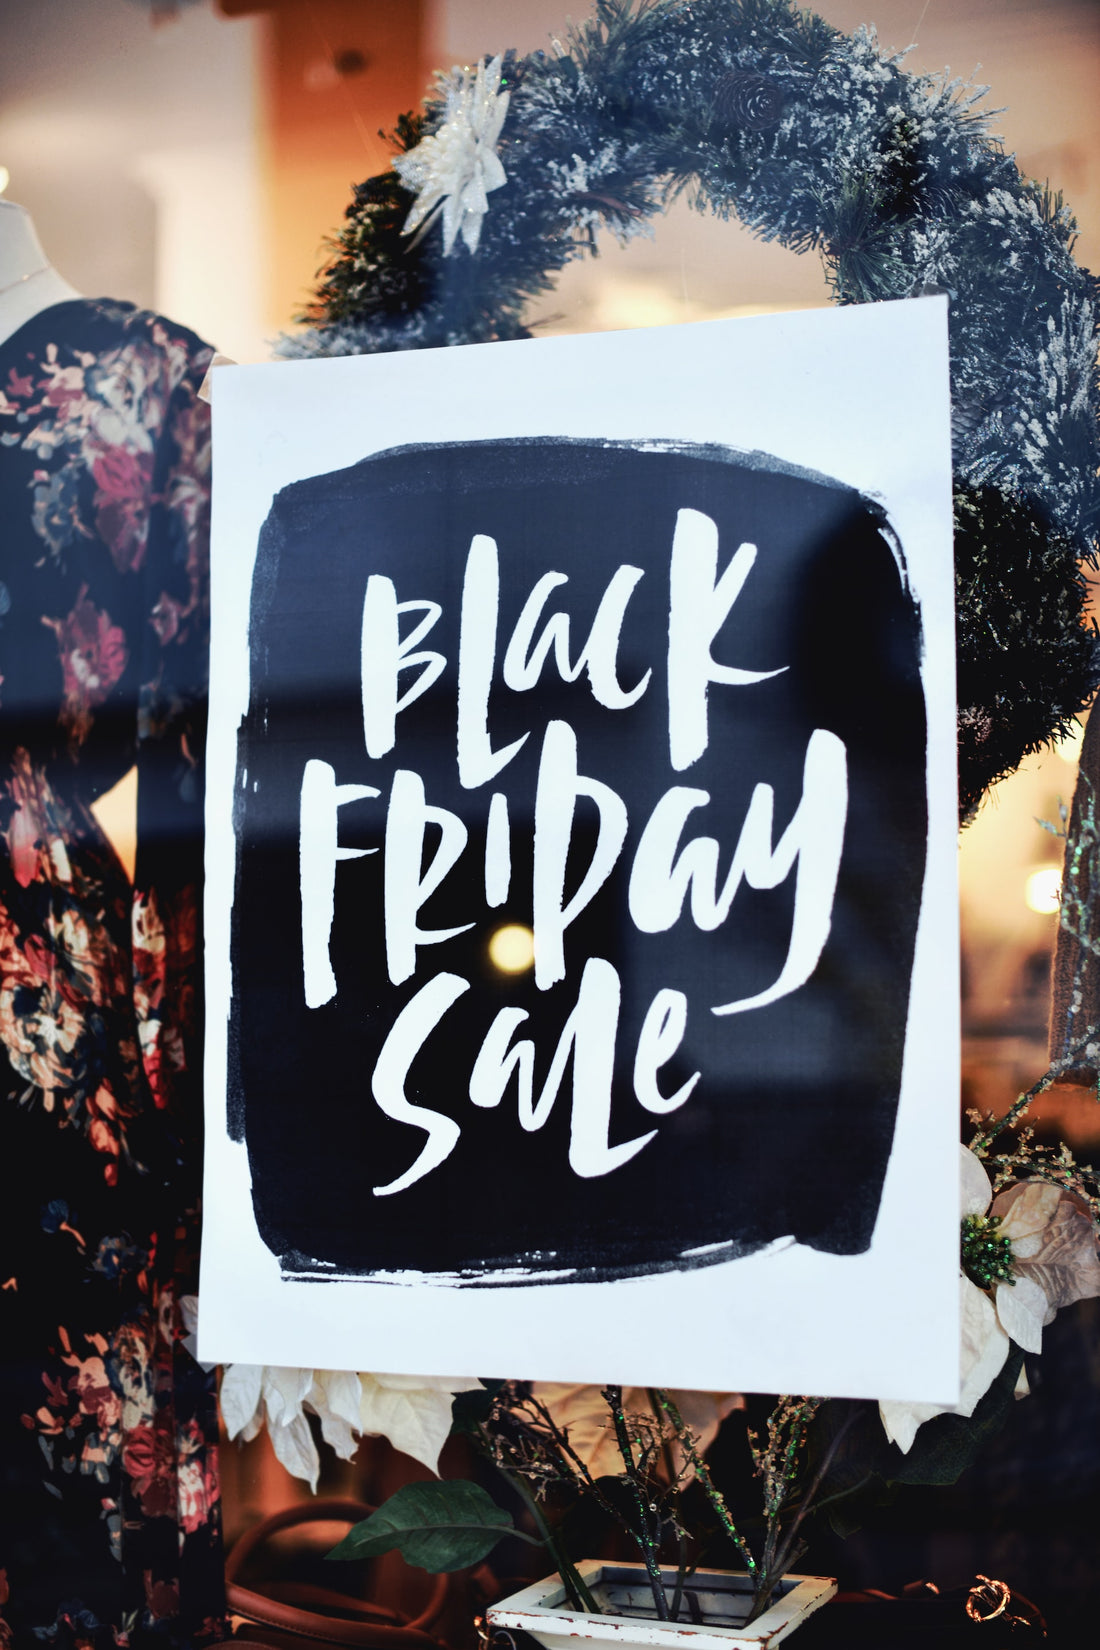 Sustainable Shopping Tips for Black Friday